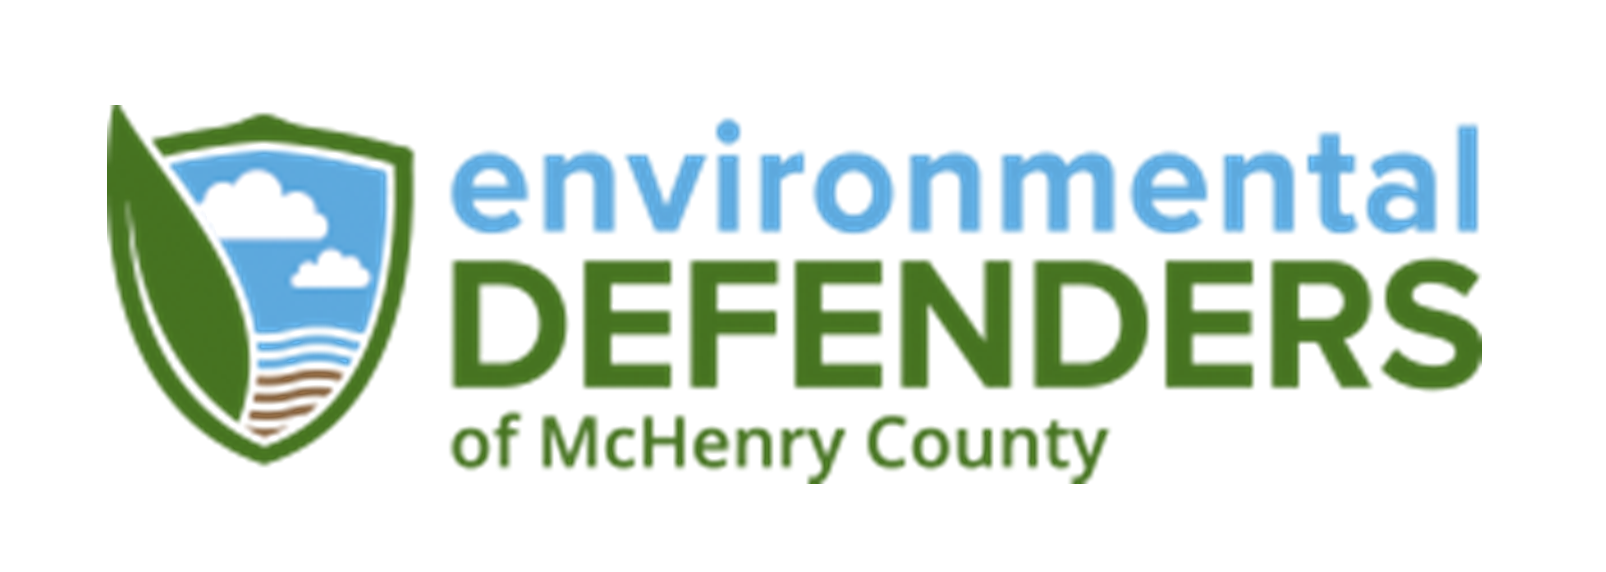 Environmental Defenders of McHenry County text logo